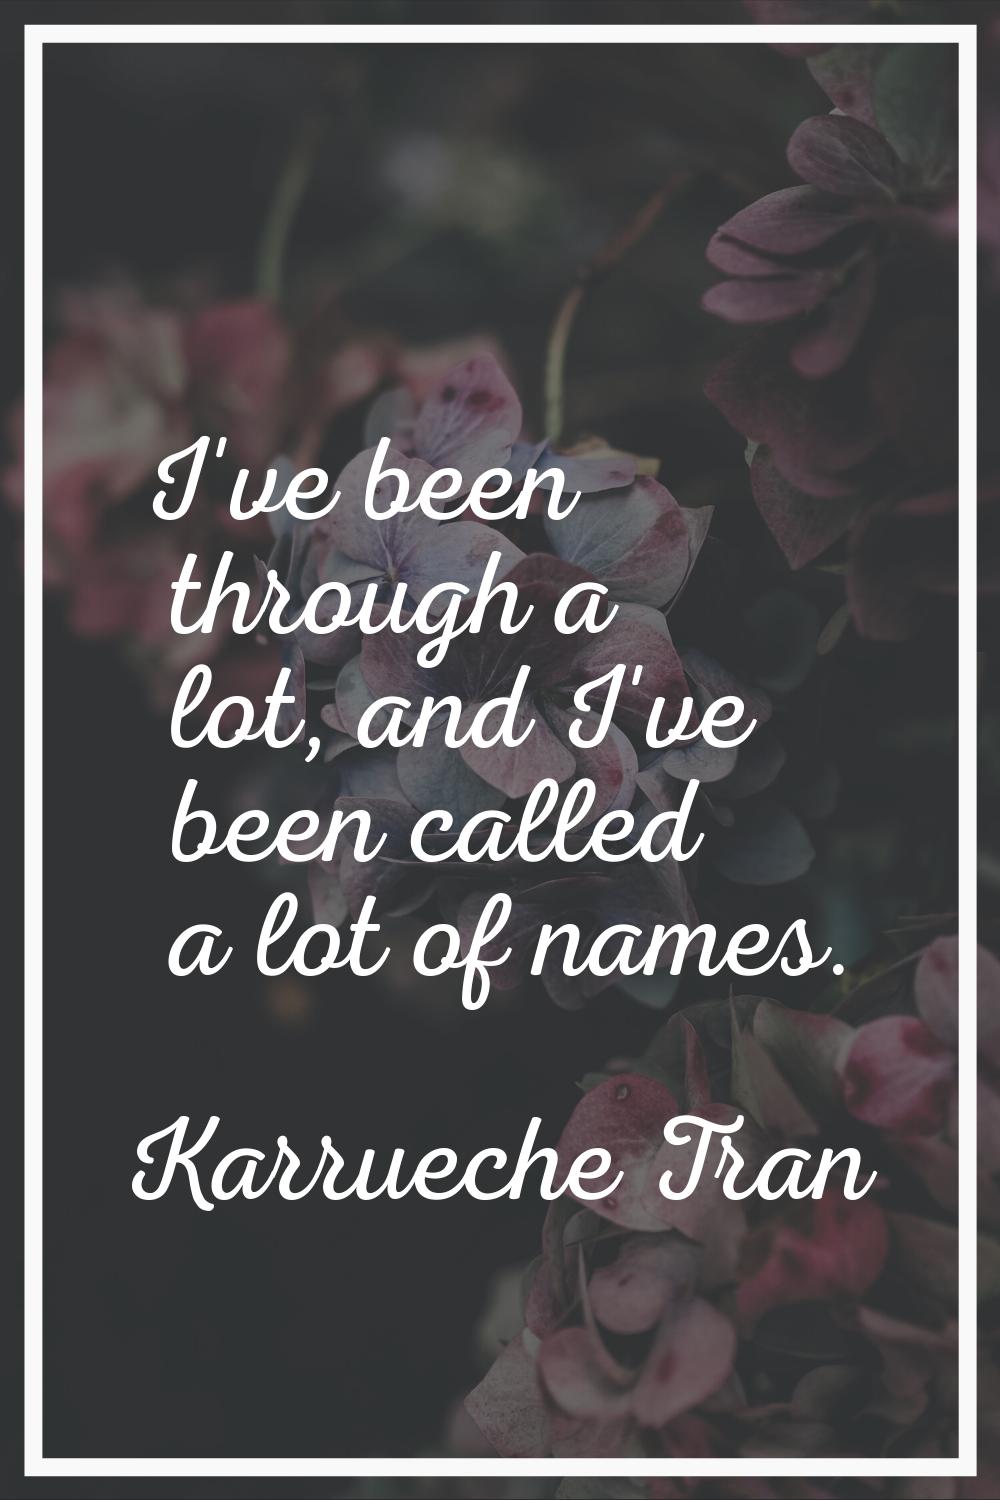 I've been through a lot, and I've been called a lot of names.